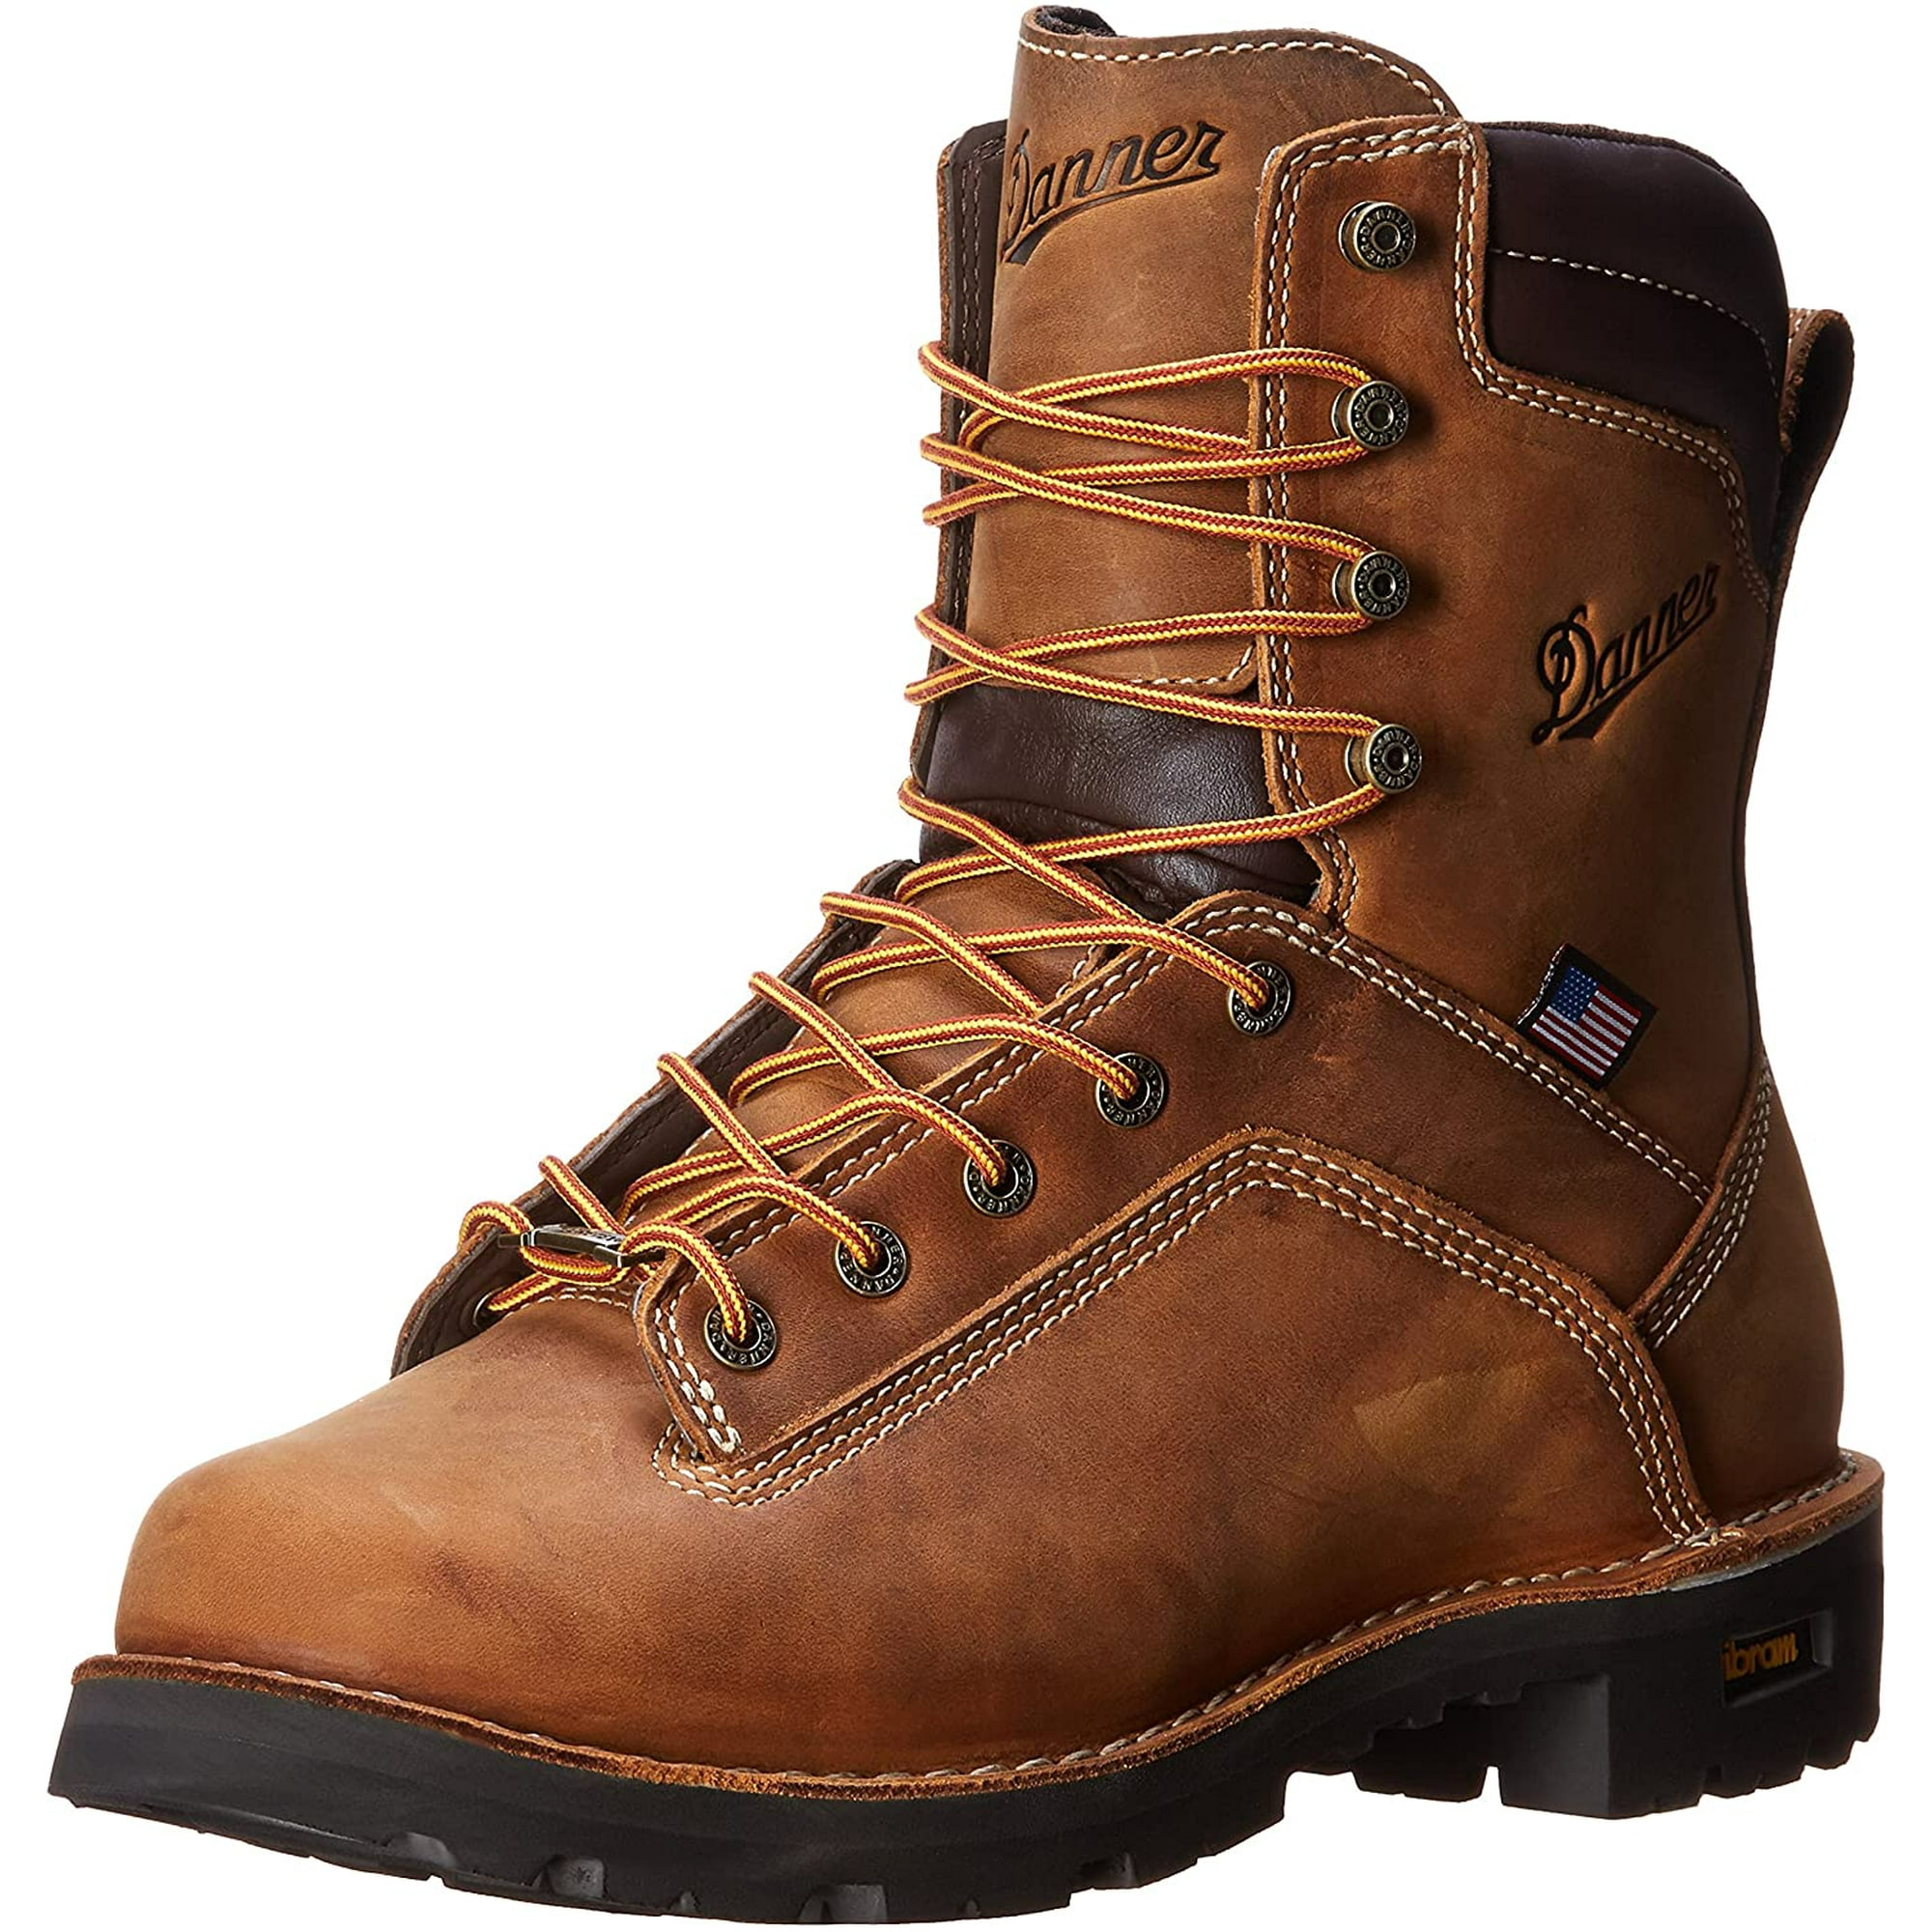 Danner Men's Quarry USA 8 Inch Work Boot,Distressed Brown,11 D US